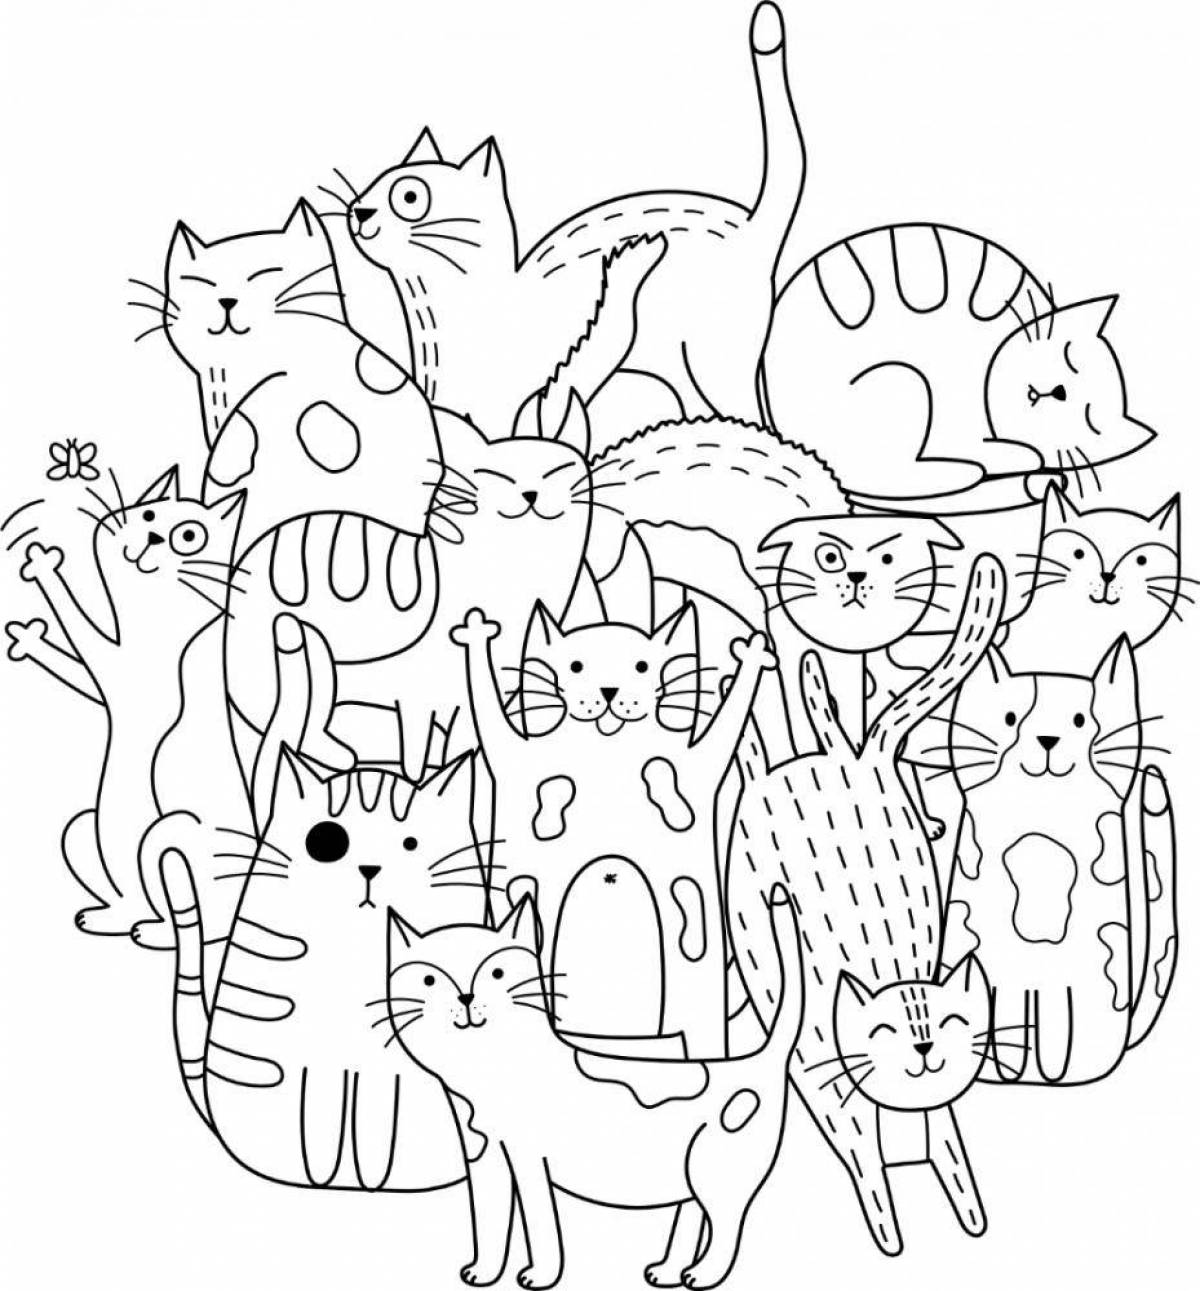 Fluffy many cats on one page